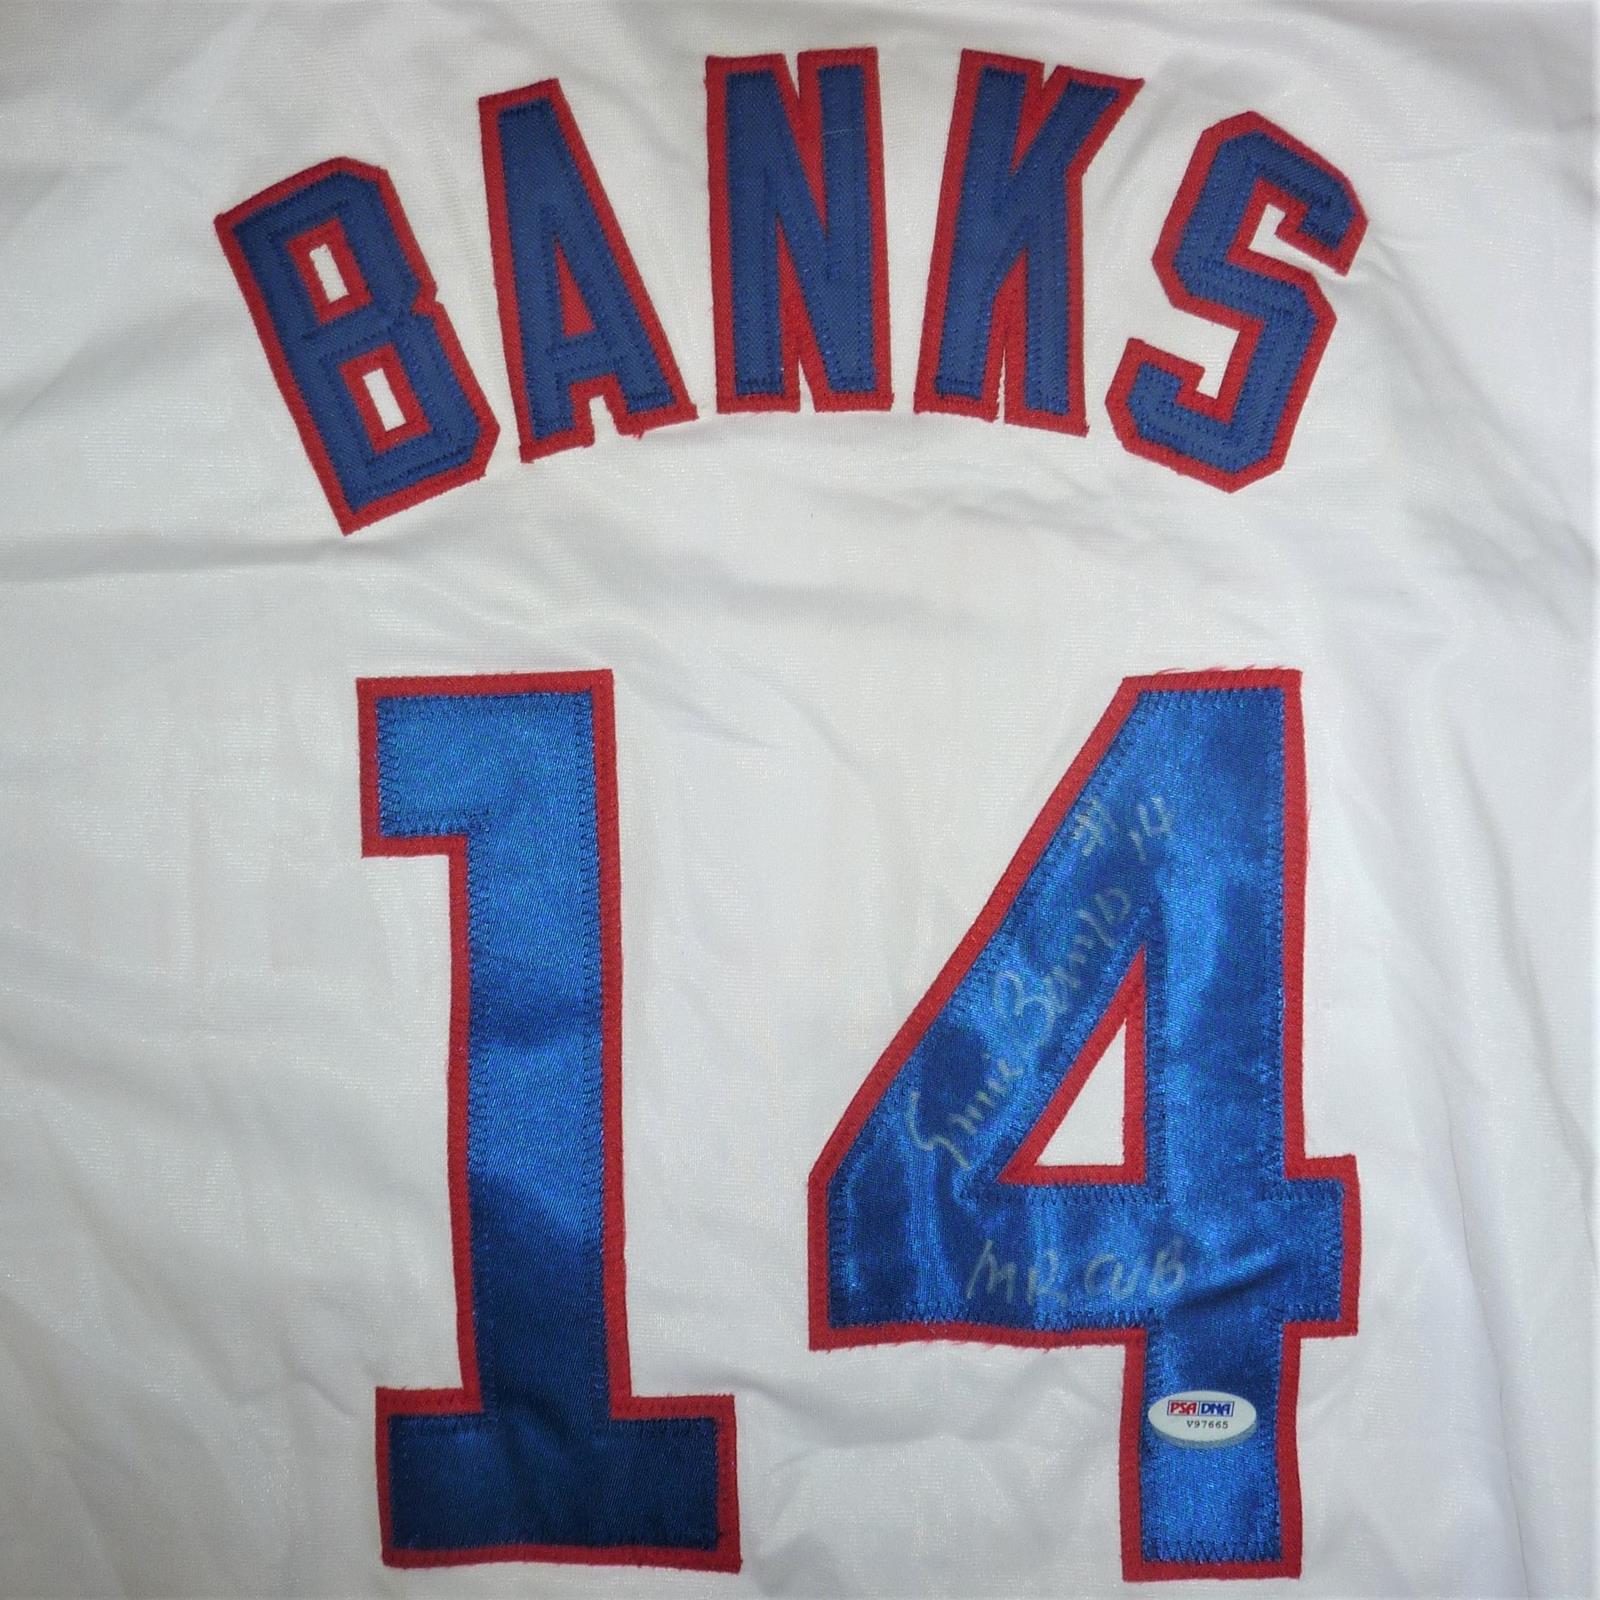 1970 Ernie Banks Chicago Cubs autographed game worn jersey. $100,000.